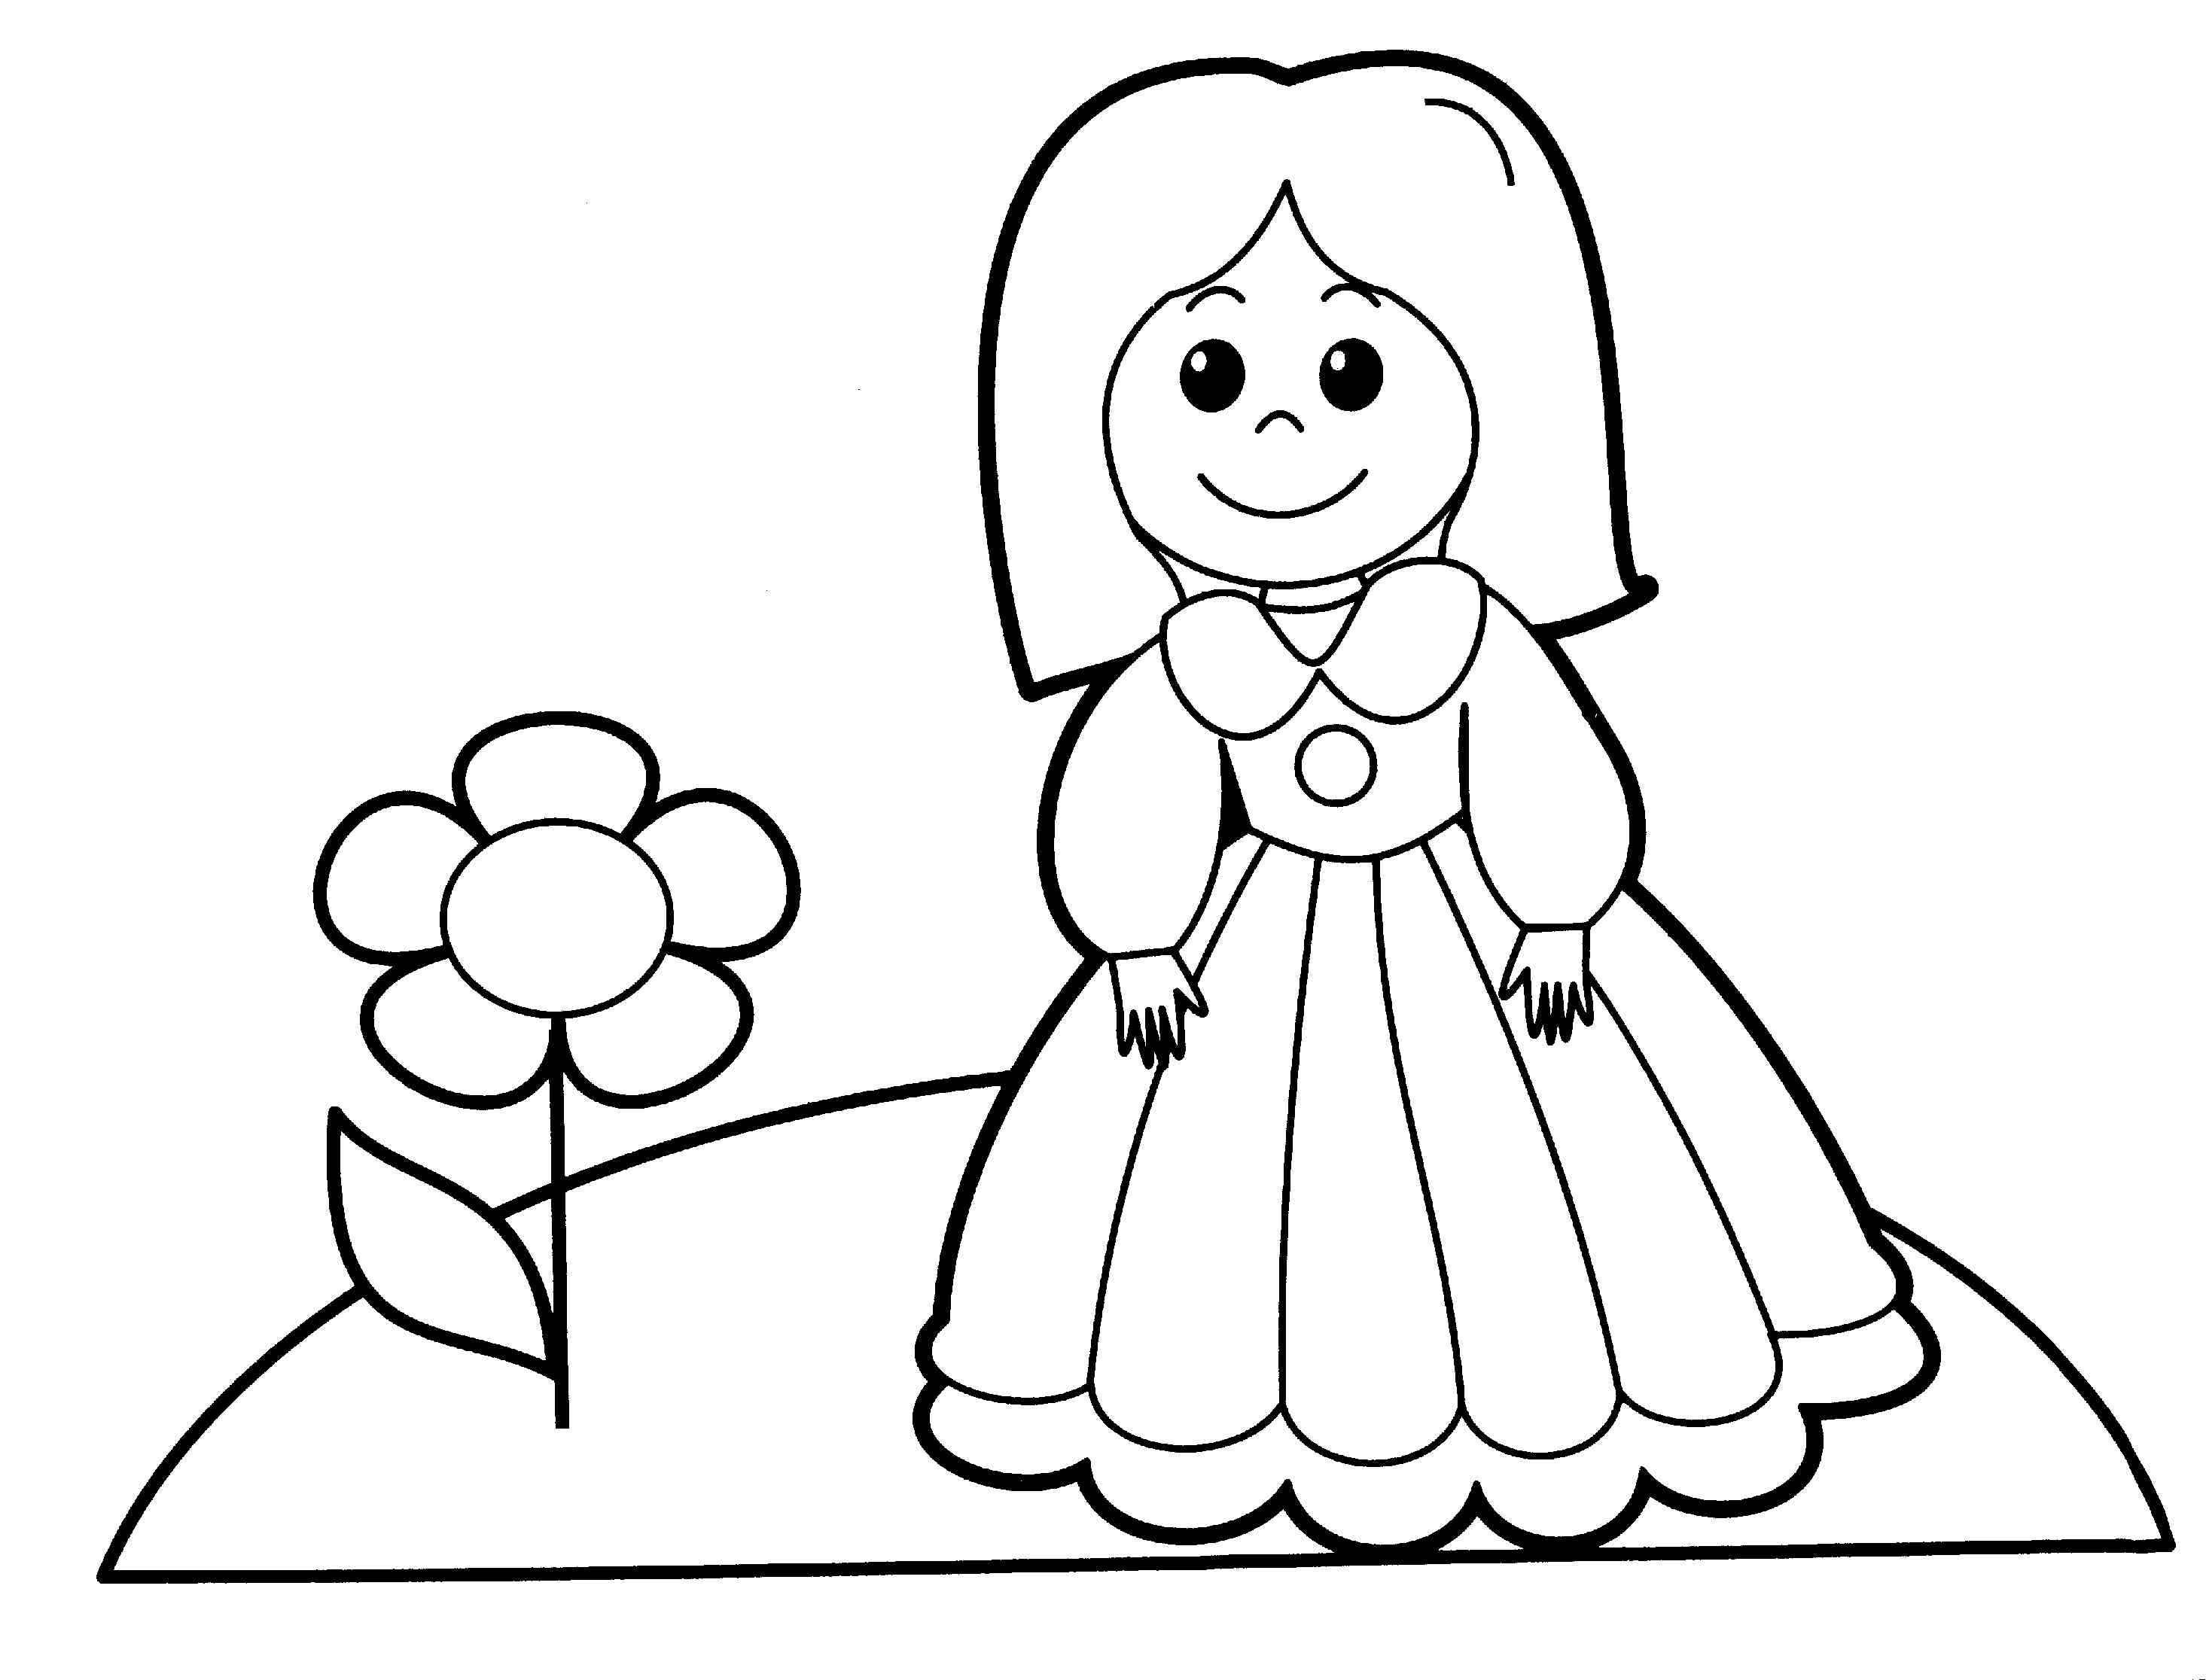 Free Free Printable Baby Doll Coloring Pages, Download Free Clip ...